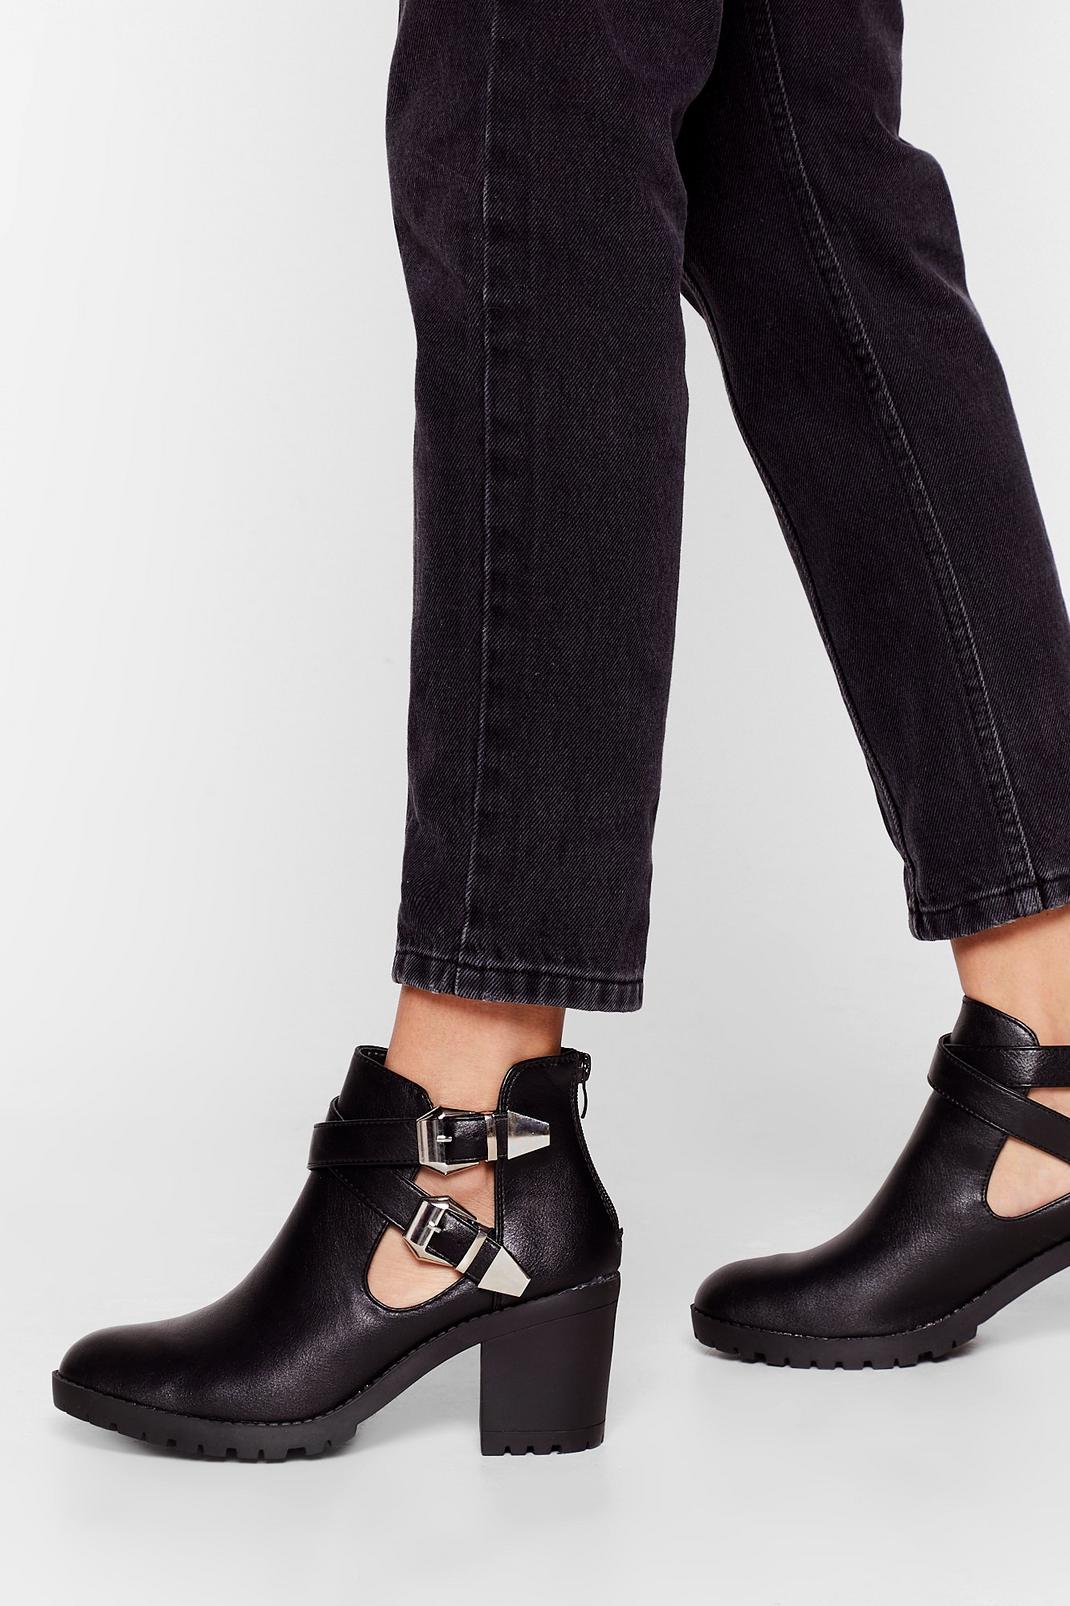 Strap That Buckle Heeled Boots | Nasty Gal